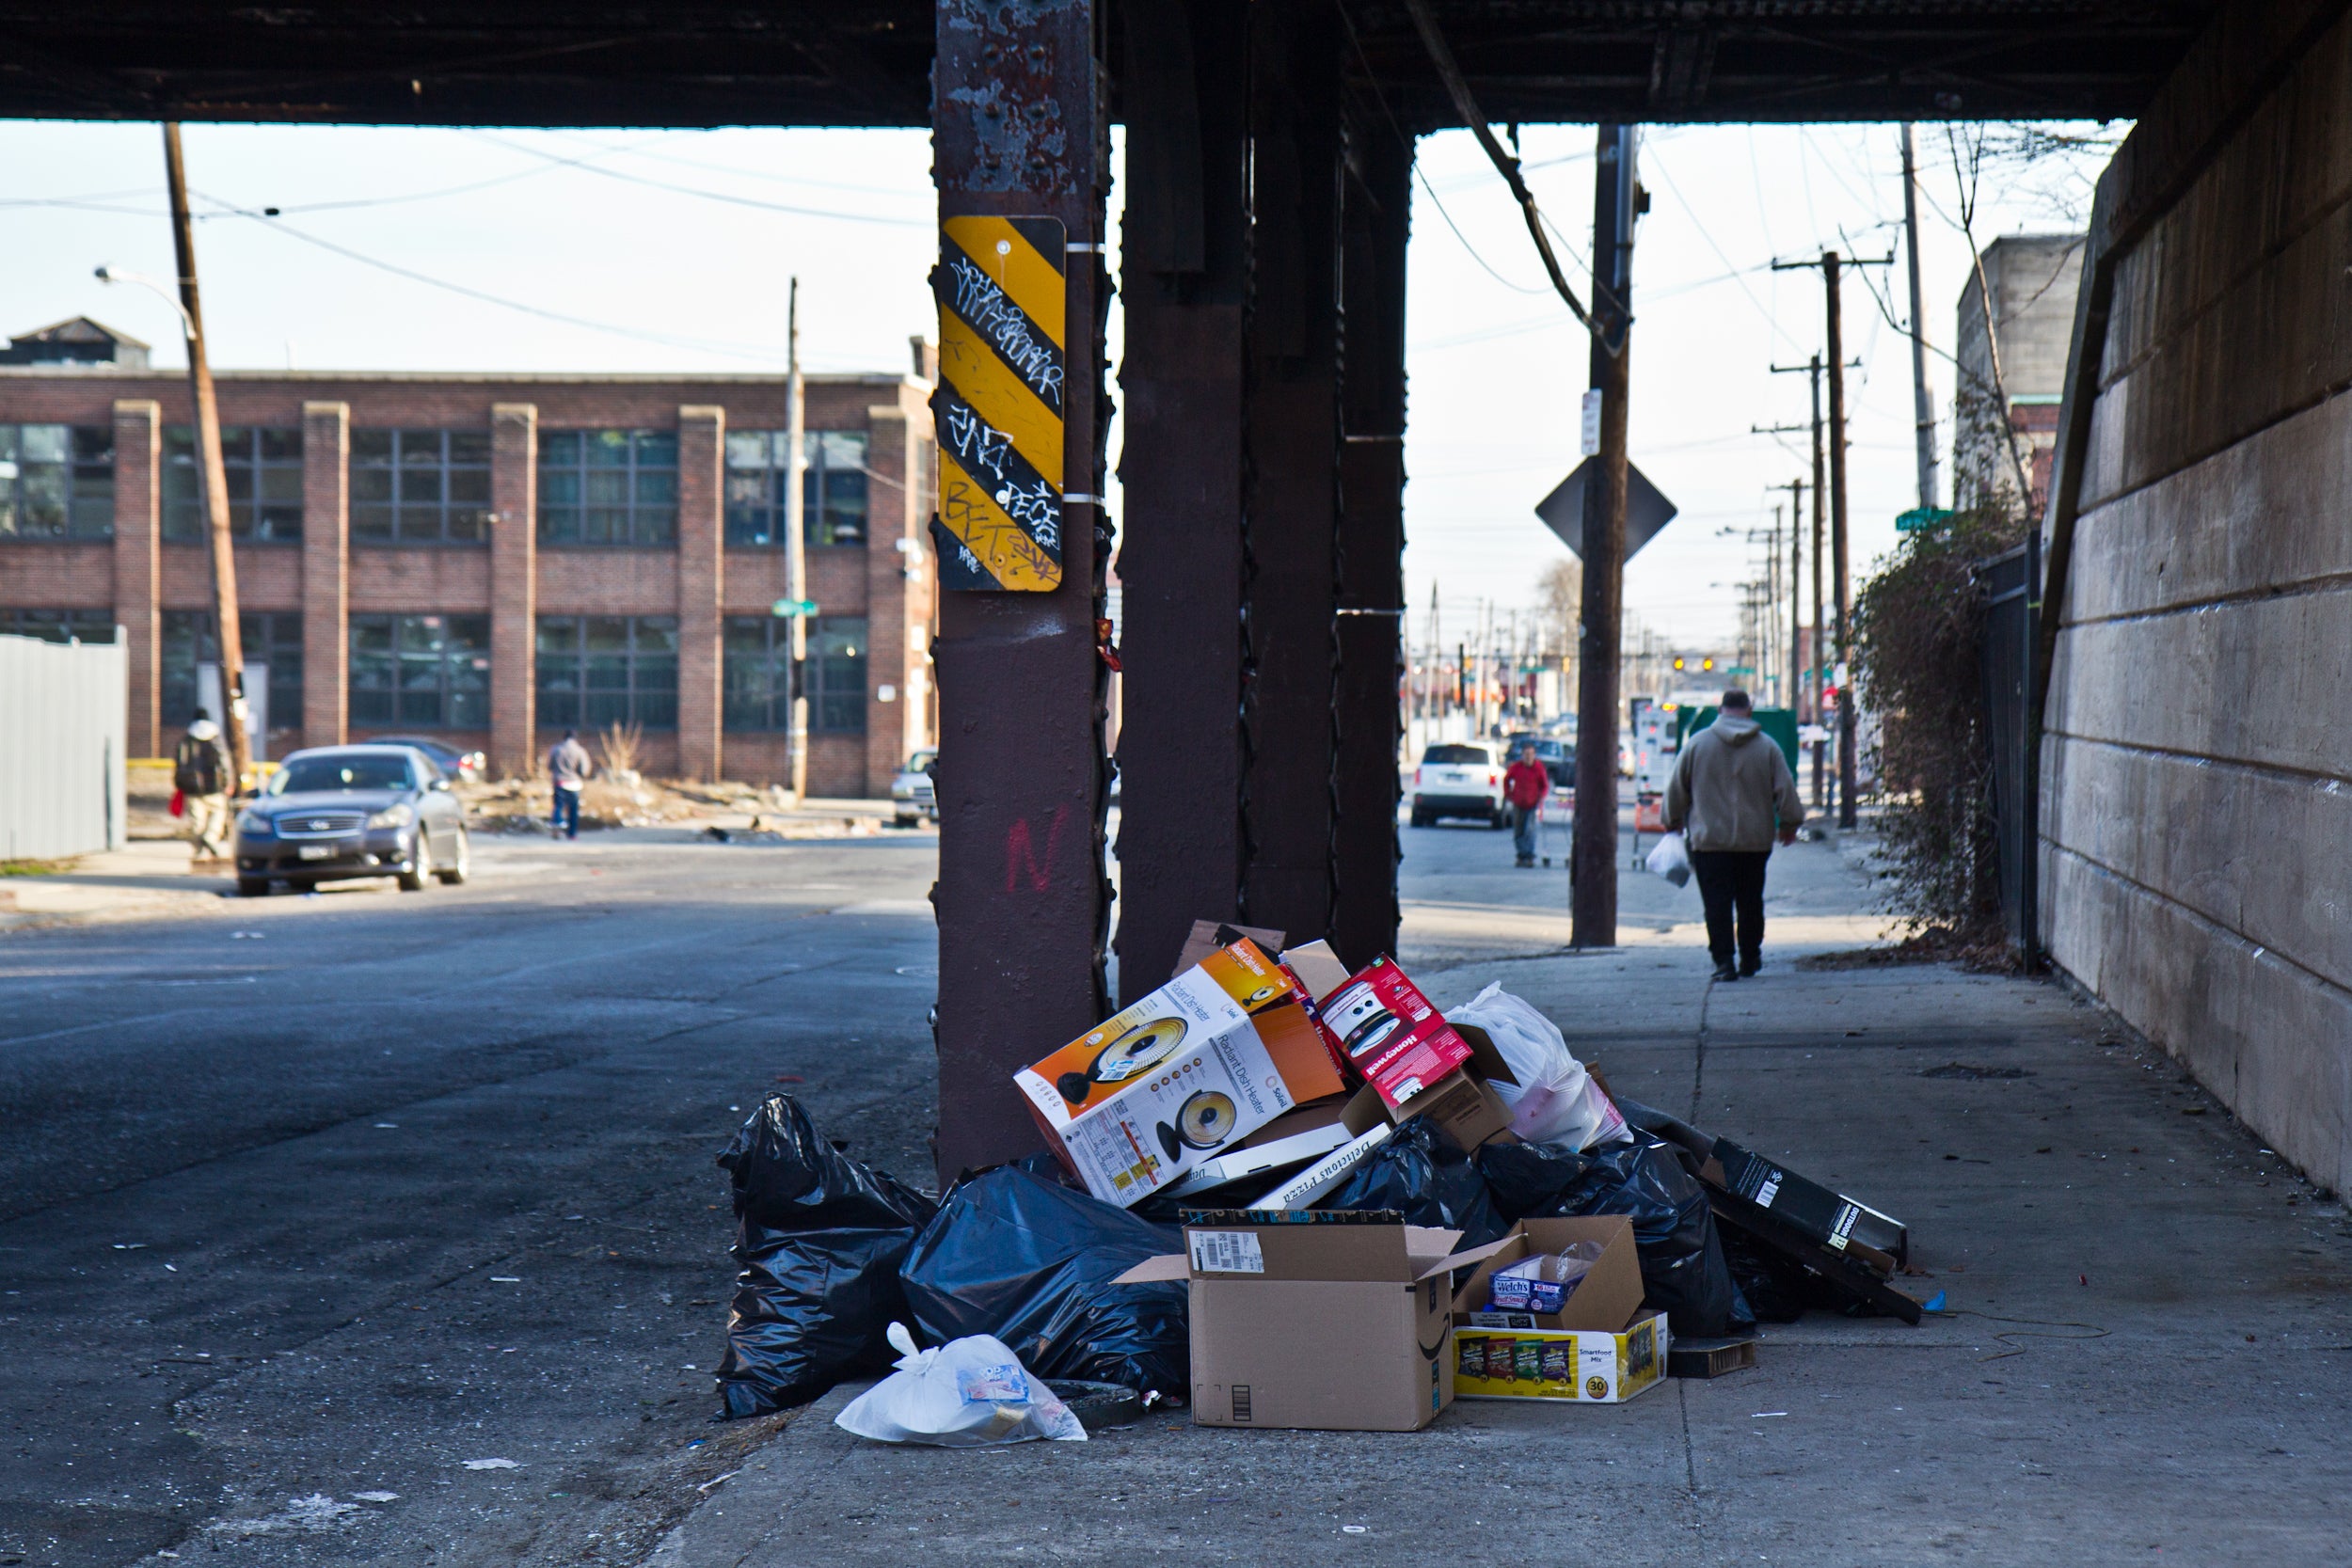 East Tioga and Amber streets is rated a “2” on Philadelphia’s Litter Index. (Kimberly Paynter/WHYY)